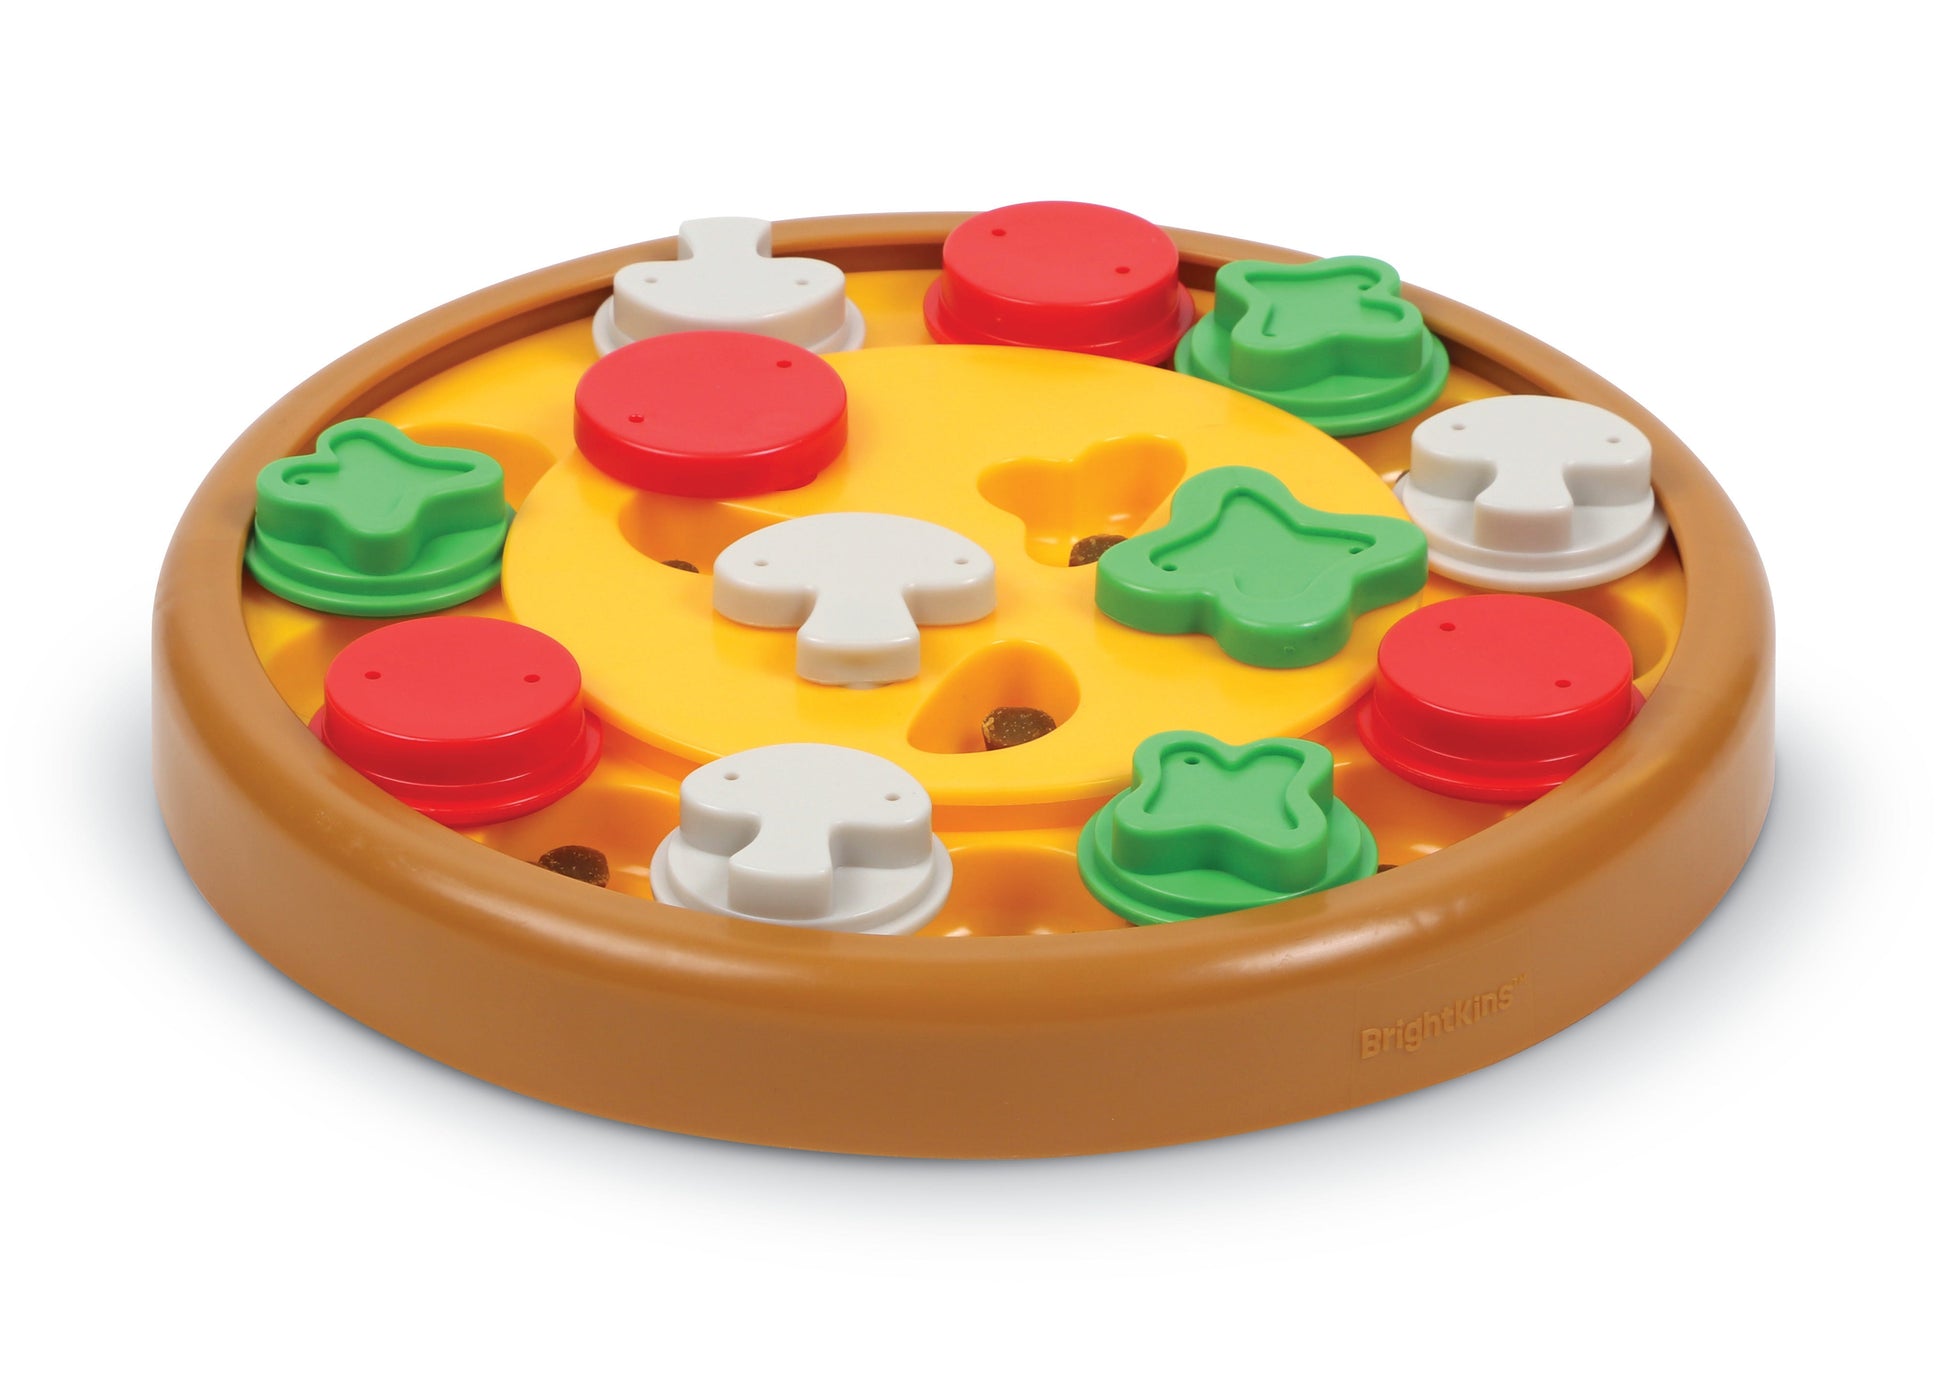 Brightkins Pizza Party! Treat Puzzle - Dog Puzzle Toys, Interactive Dog  Toys, Gifts for Dogs - Yahoo Shopping